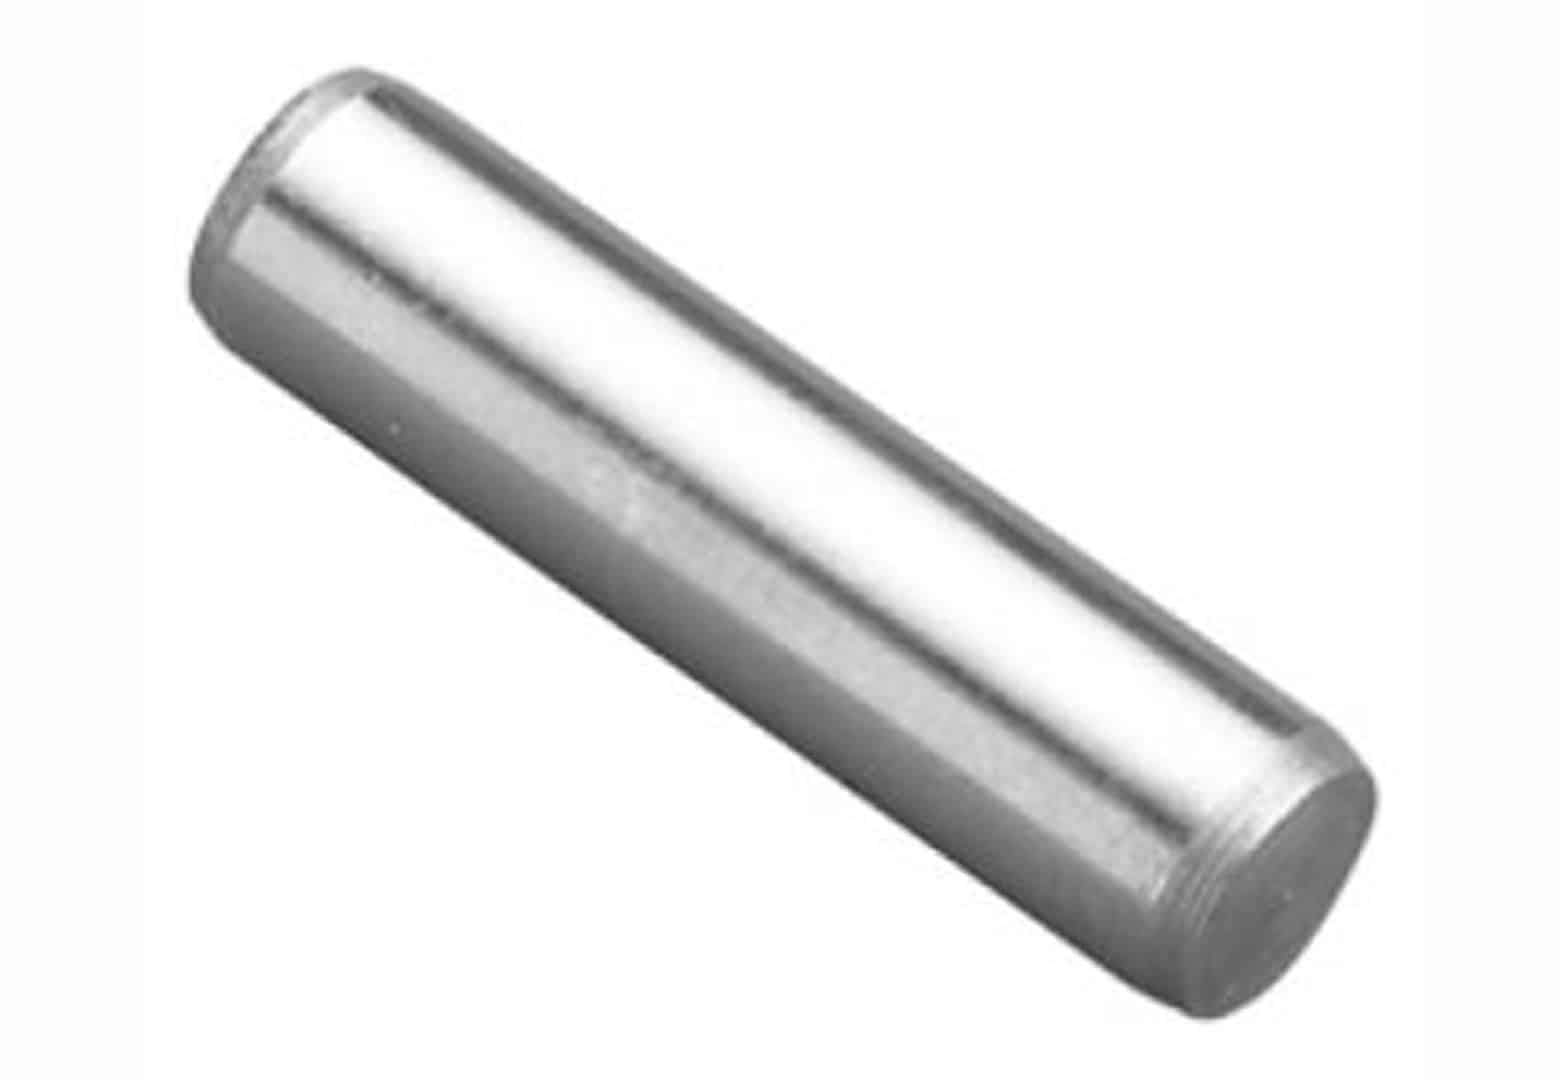 M5 X 24mm 400 pcs DIN 7 Type A 18-8 AISI 303 Stainless Steel Solid Dowel Pins Metric 